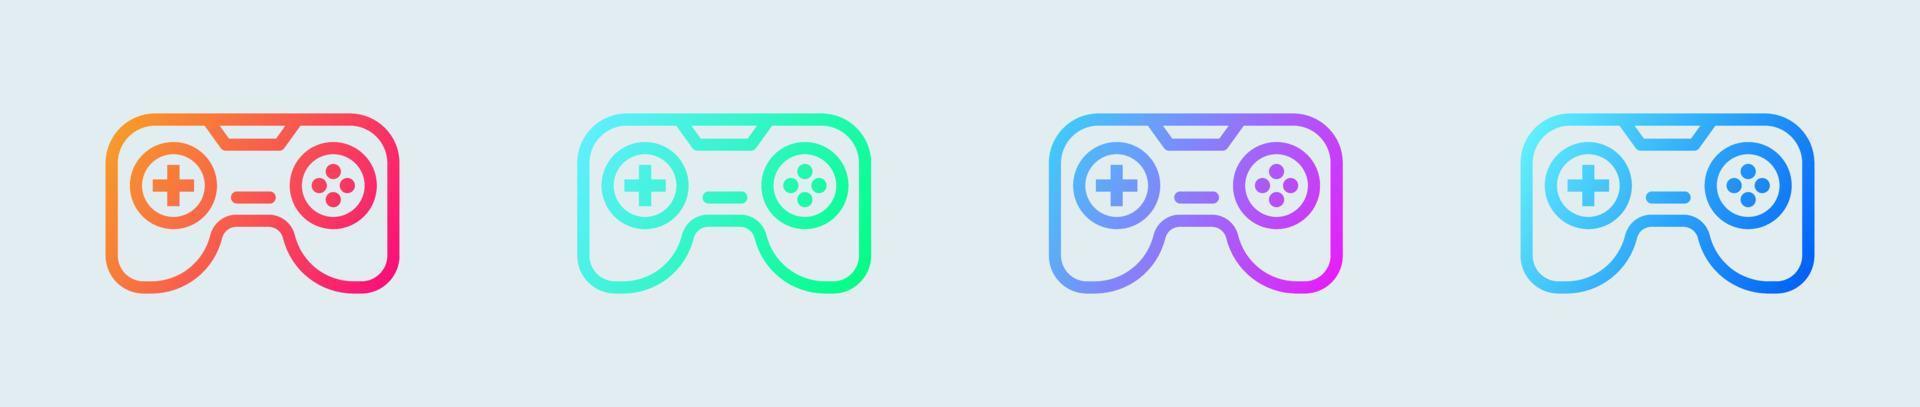 Joystick line icon in gradient colors. Game controller signs vector illustration.